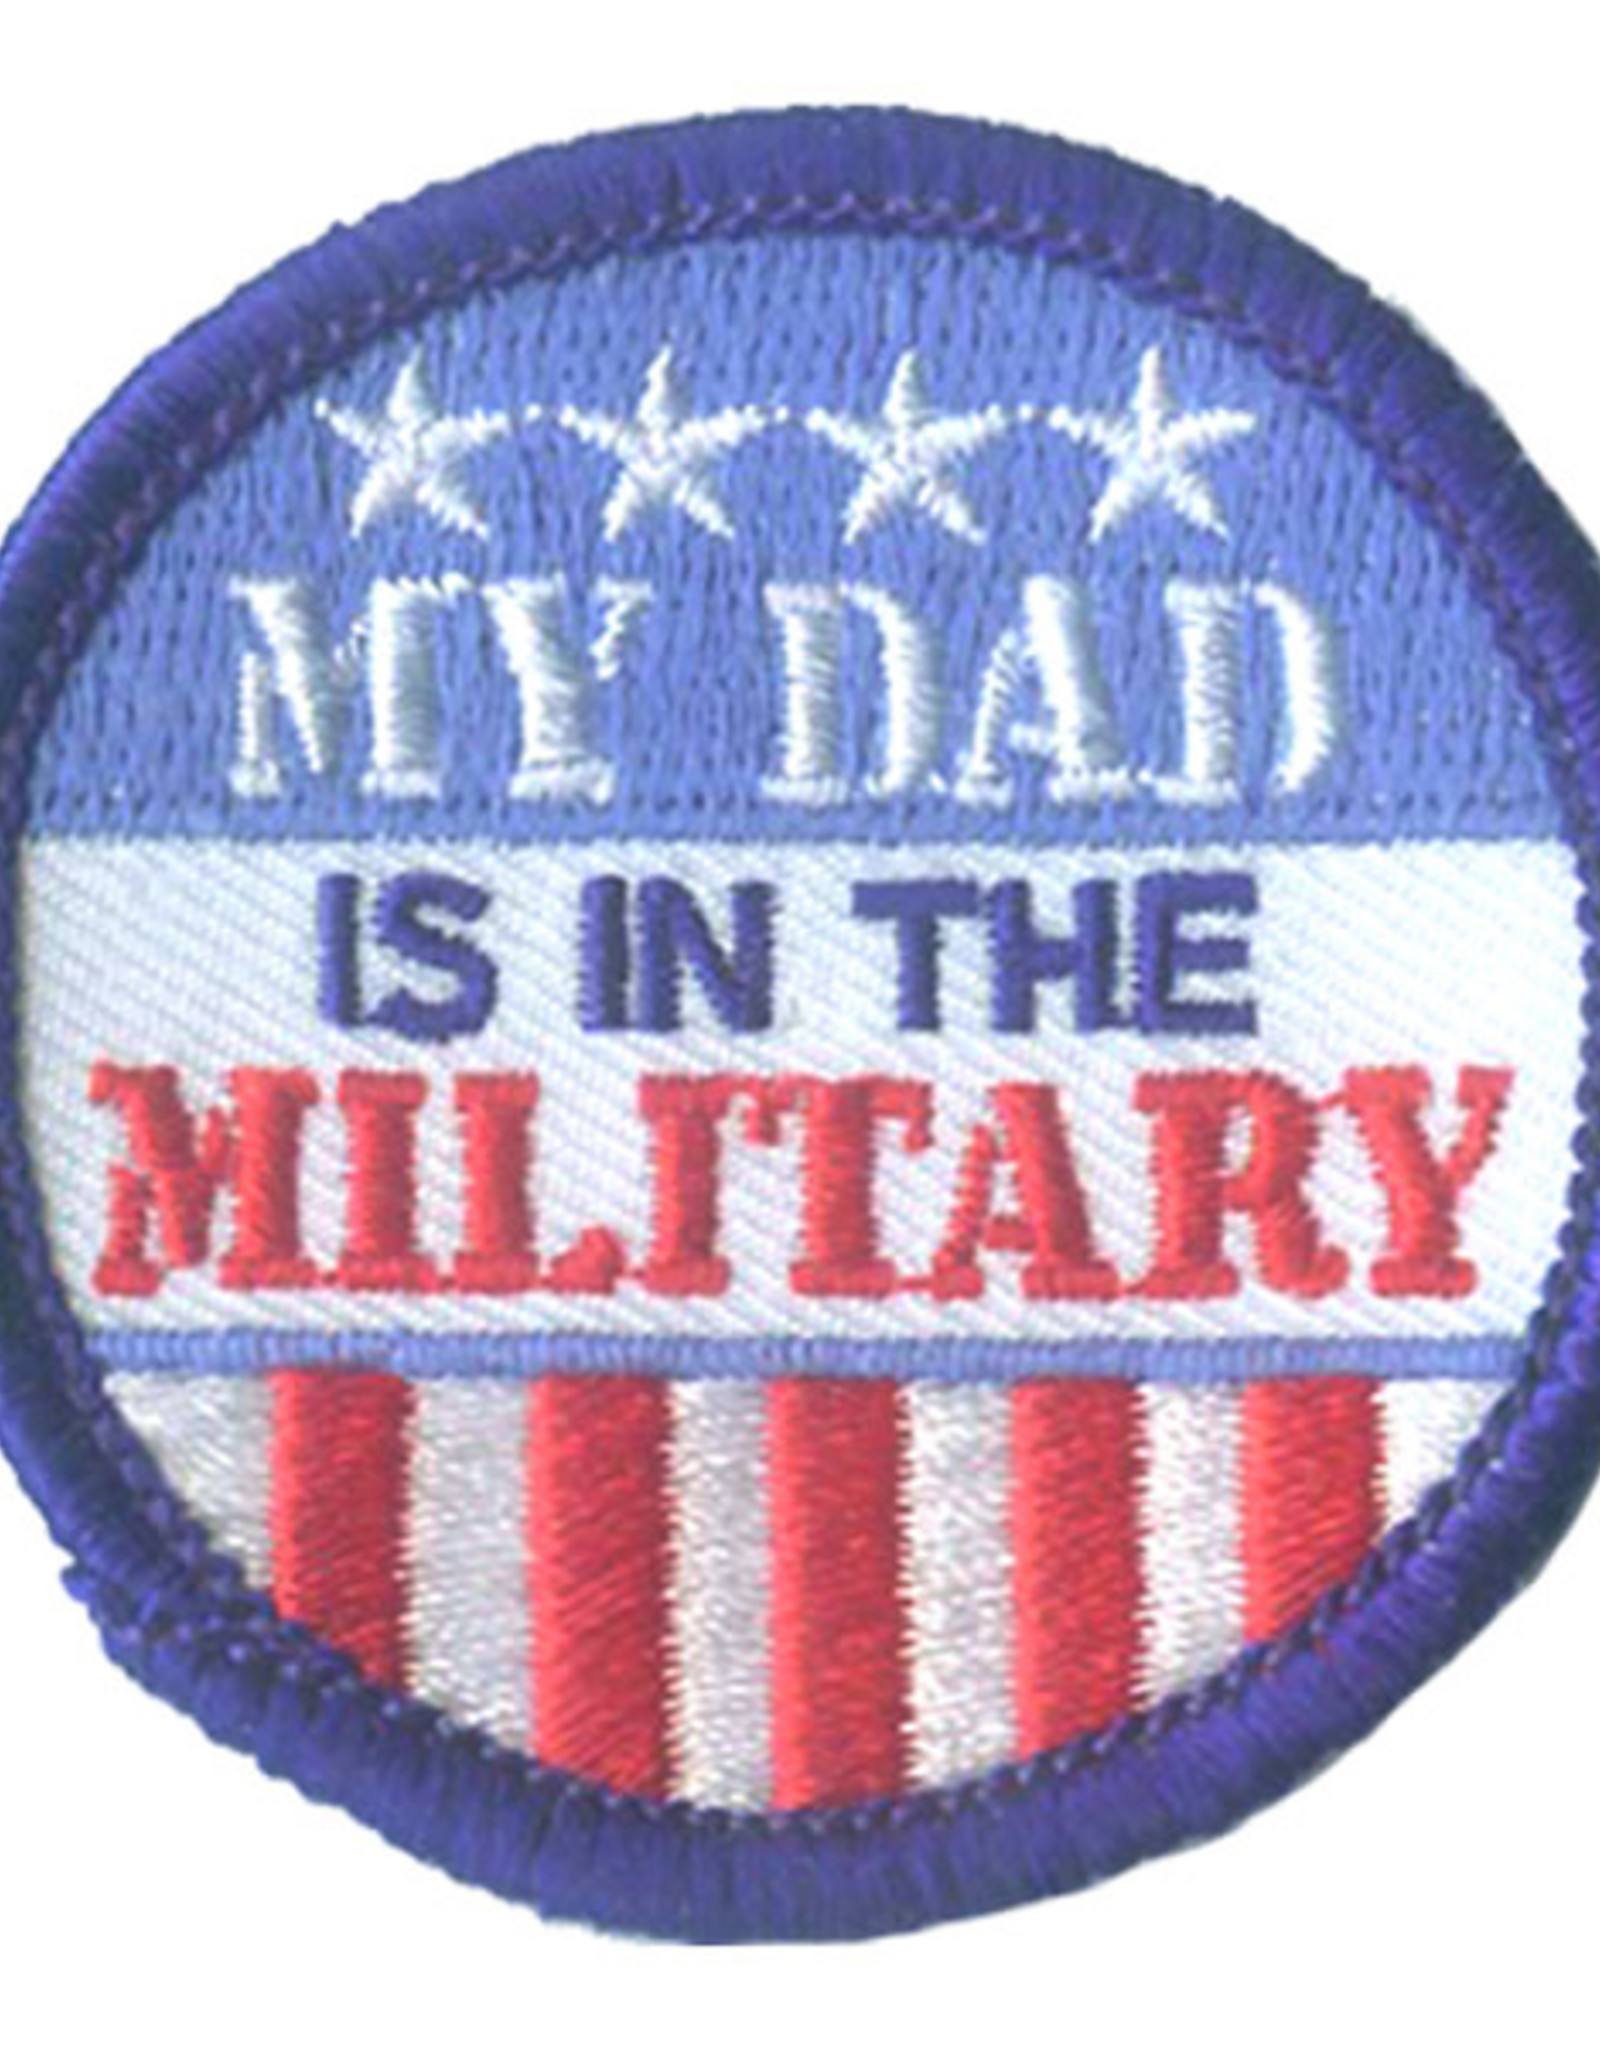 Advantage Emblem & Screen Prnt *My Dad Is in the Military Fun Patch